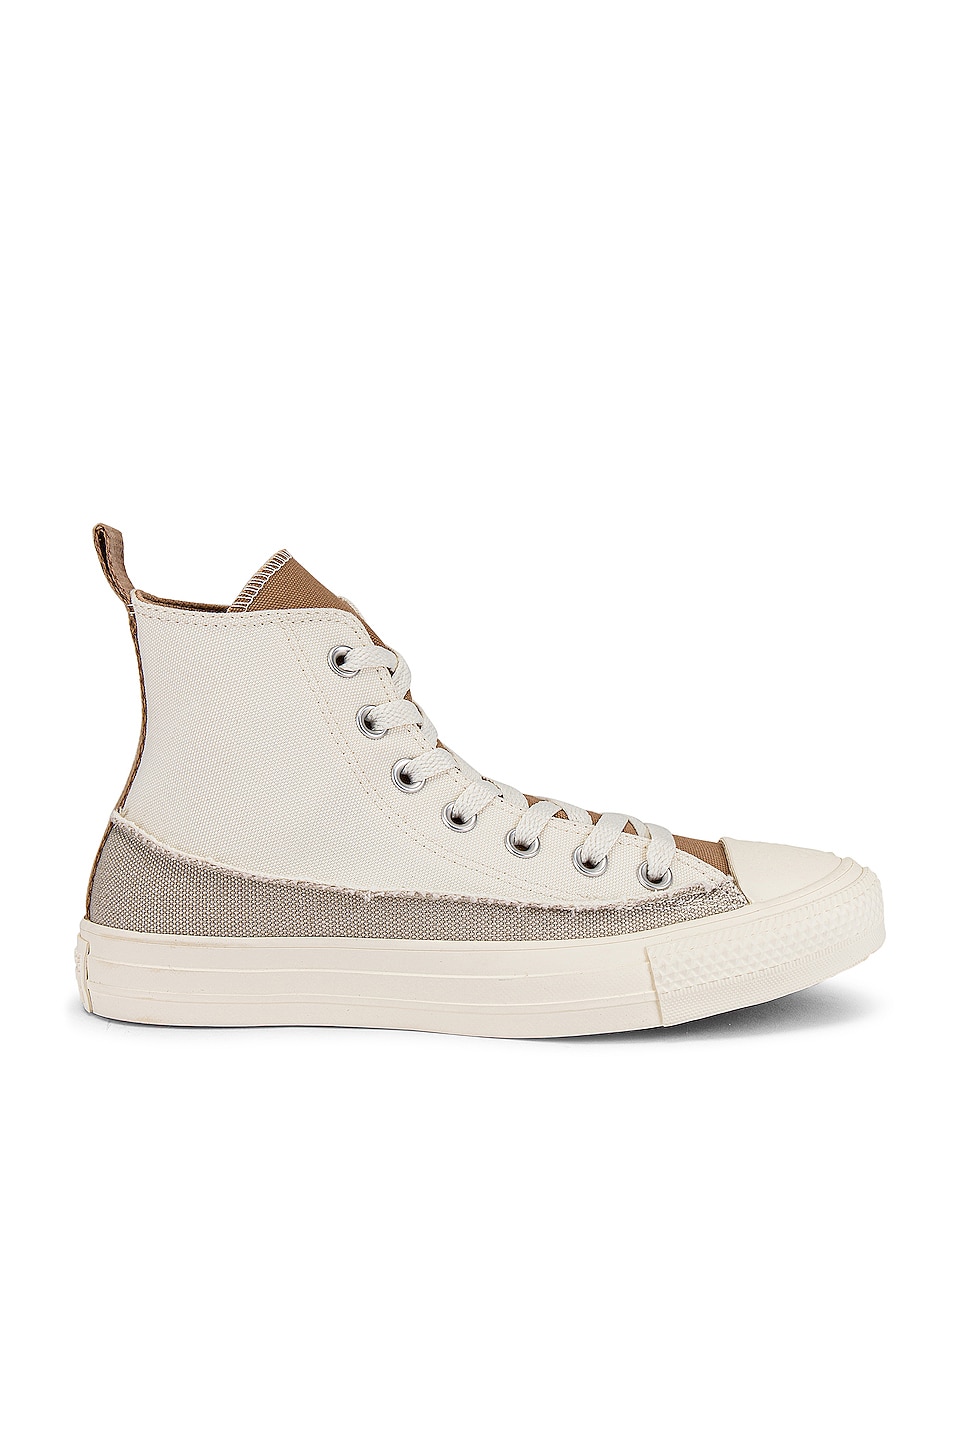 Converse Chuck Taylor All Star Crafted Canvas Sneaker in Egret, Hemp, &  String | REVOLVE